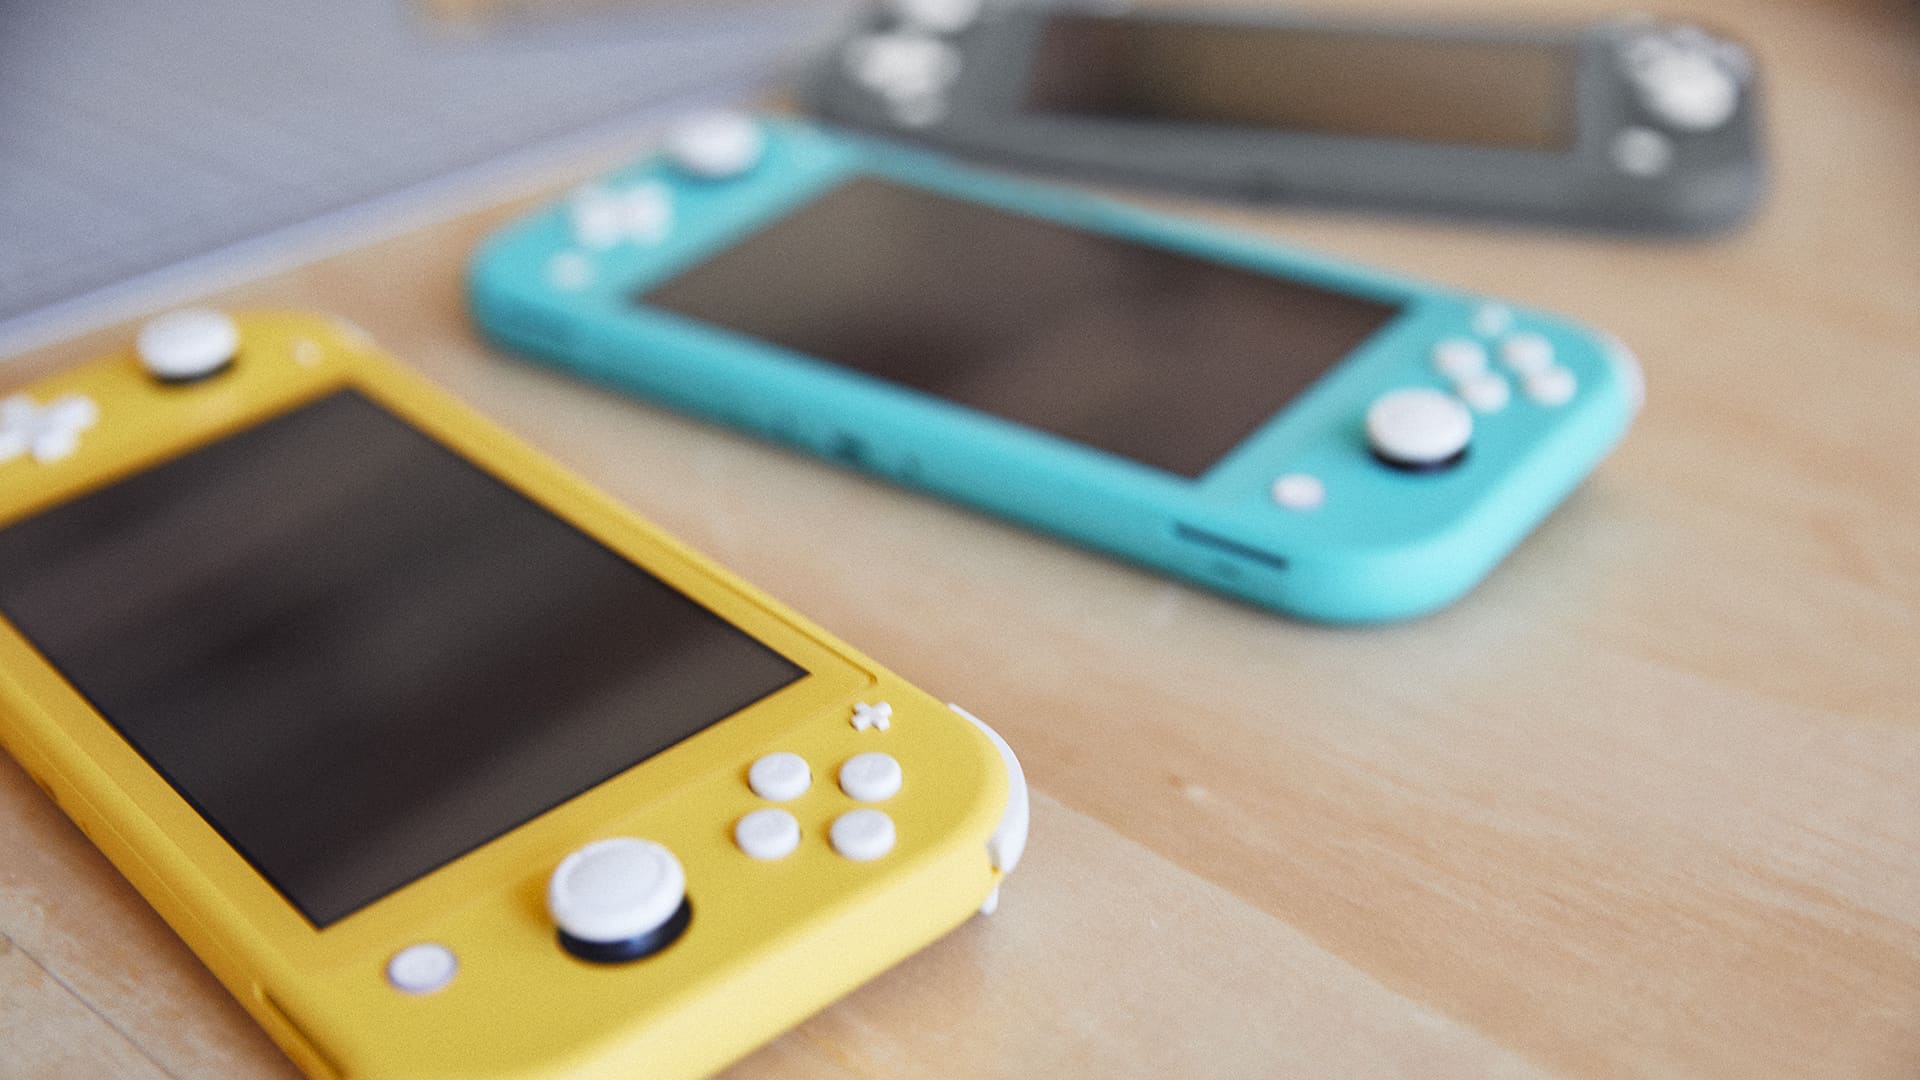 Nintendo Switch Lite Review: Excellent handheld, no dock required